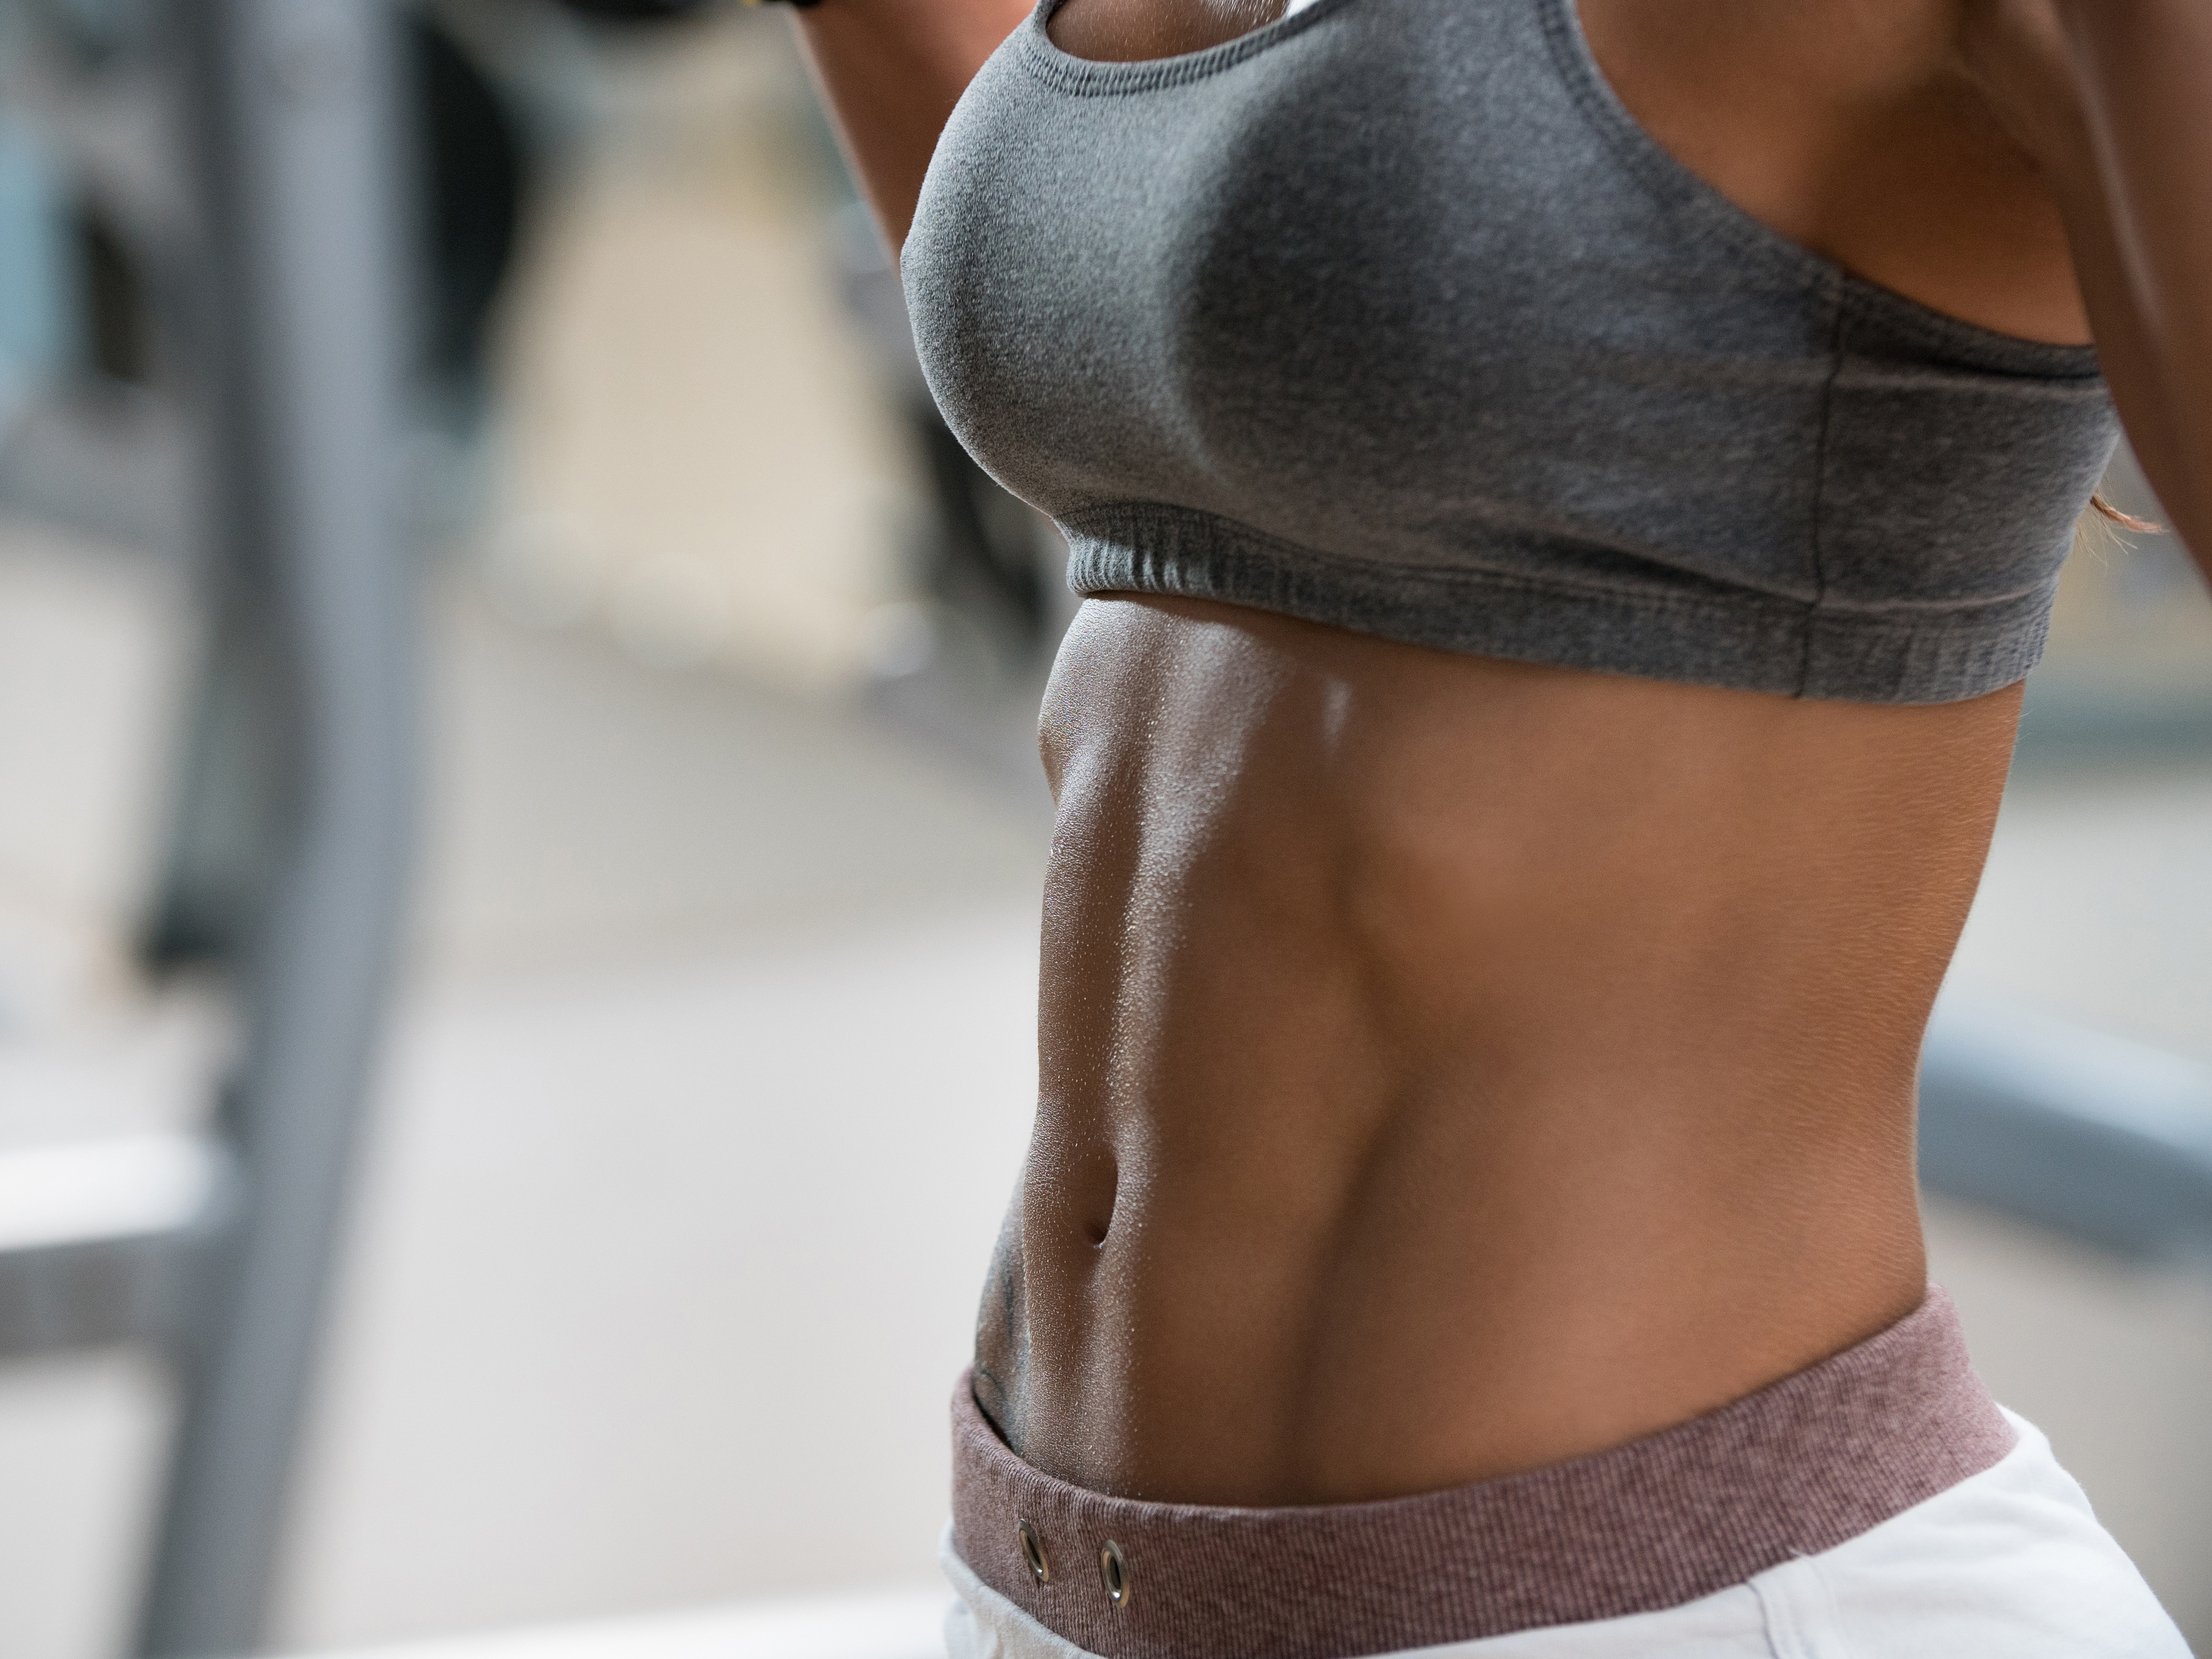 How to get a six pack: Start with diet, not exercise - CNET